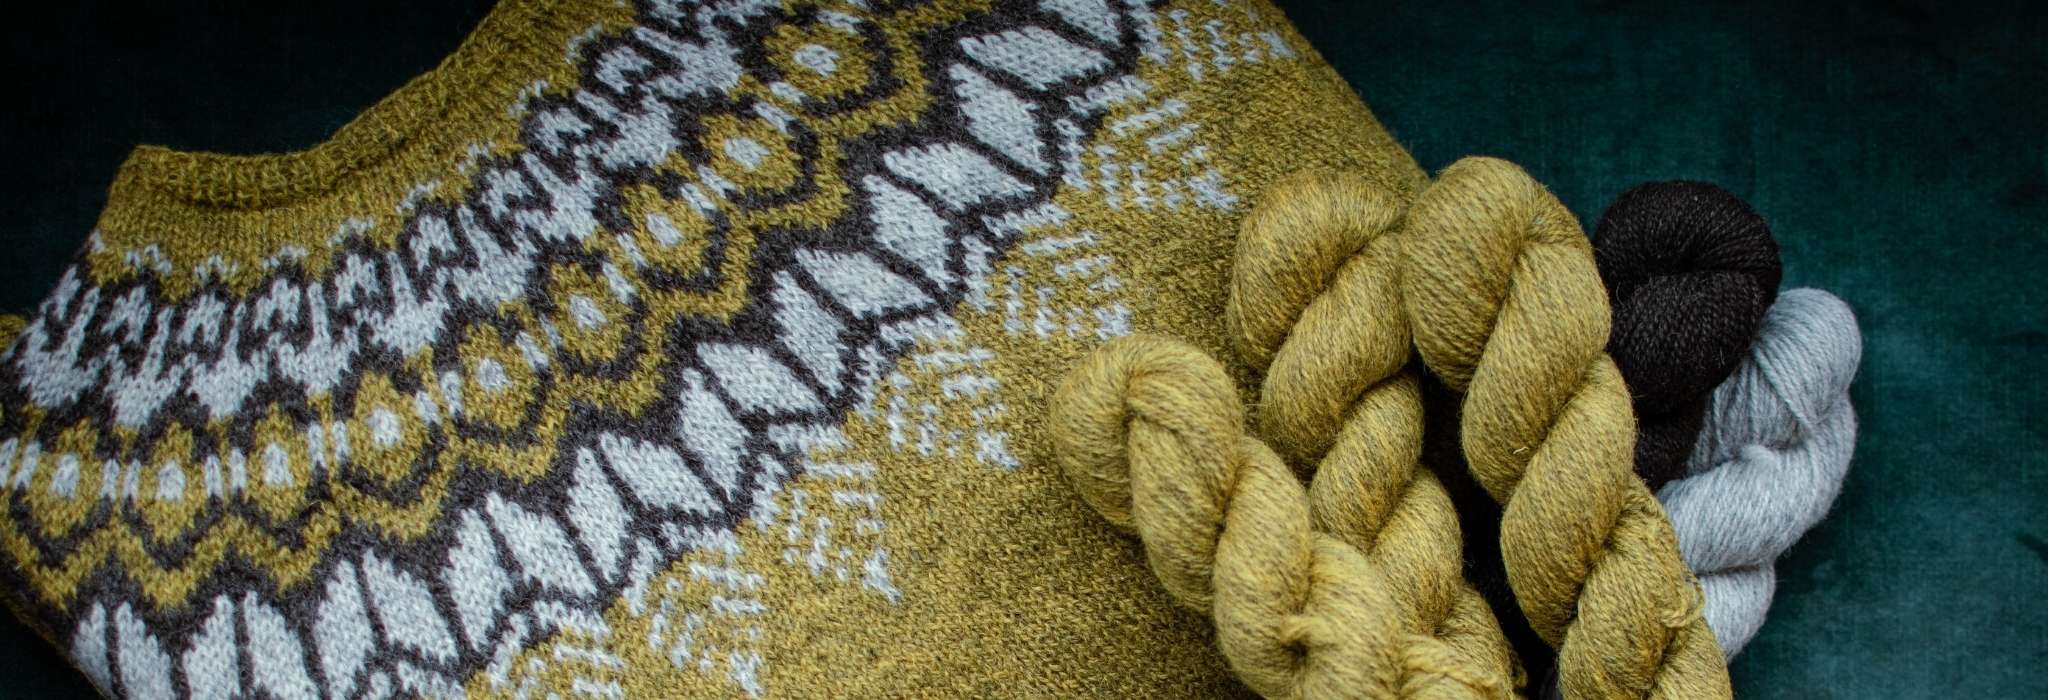 A close up of part of a colourwork yoke sweater in gold, brown and white. Some of the model's dark is visible over the top of the shoulder.